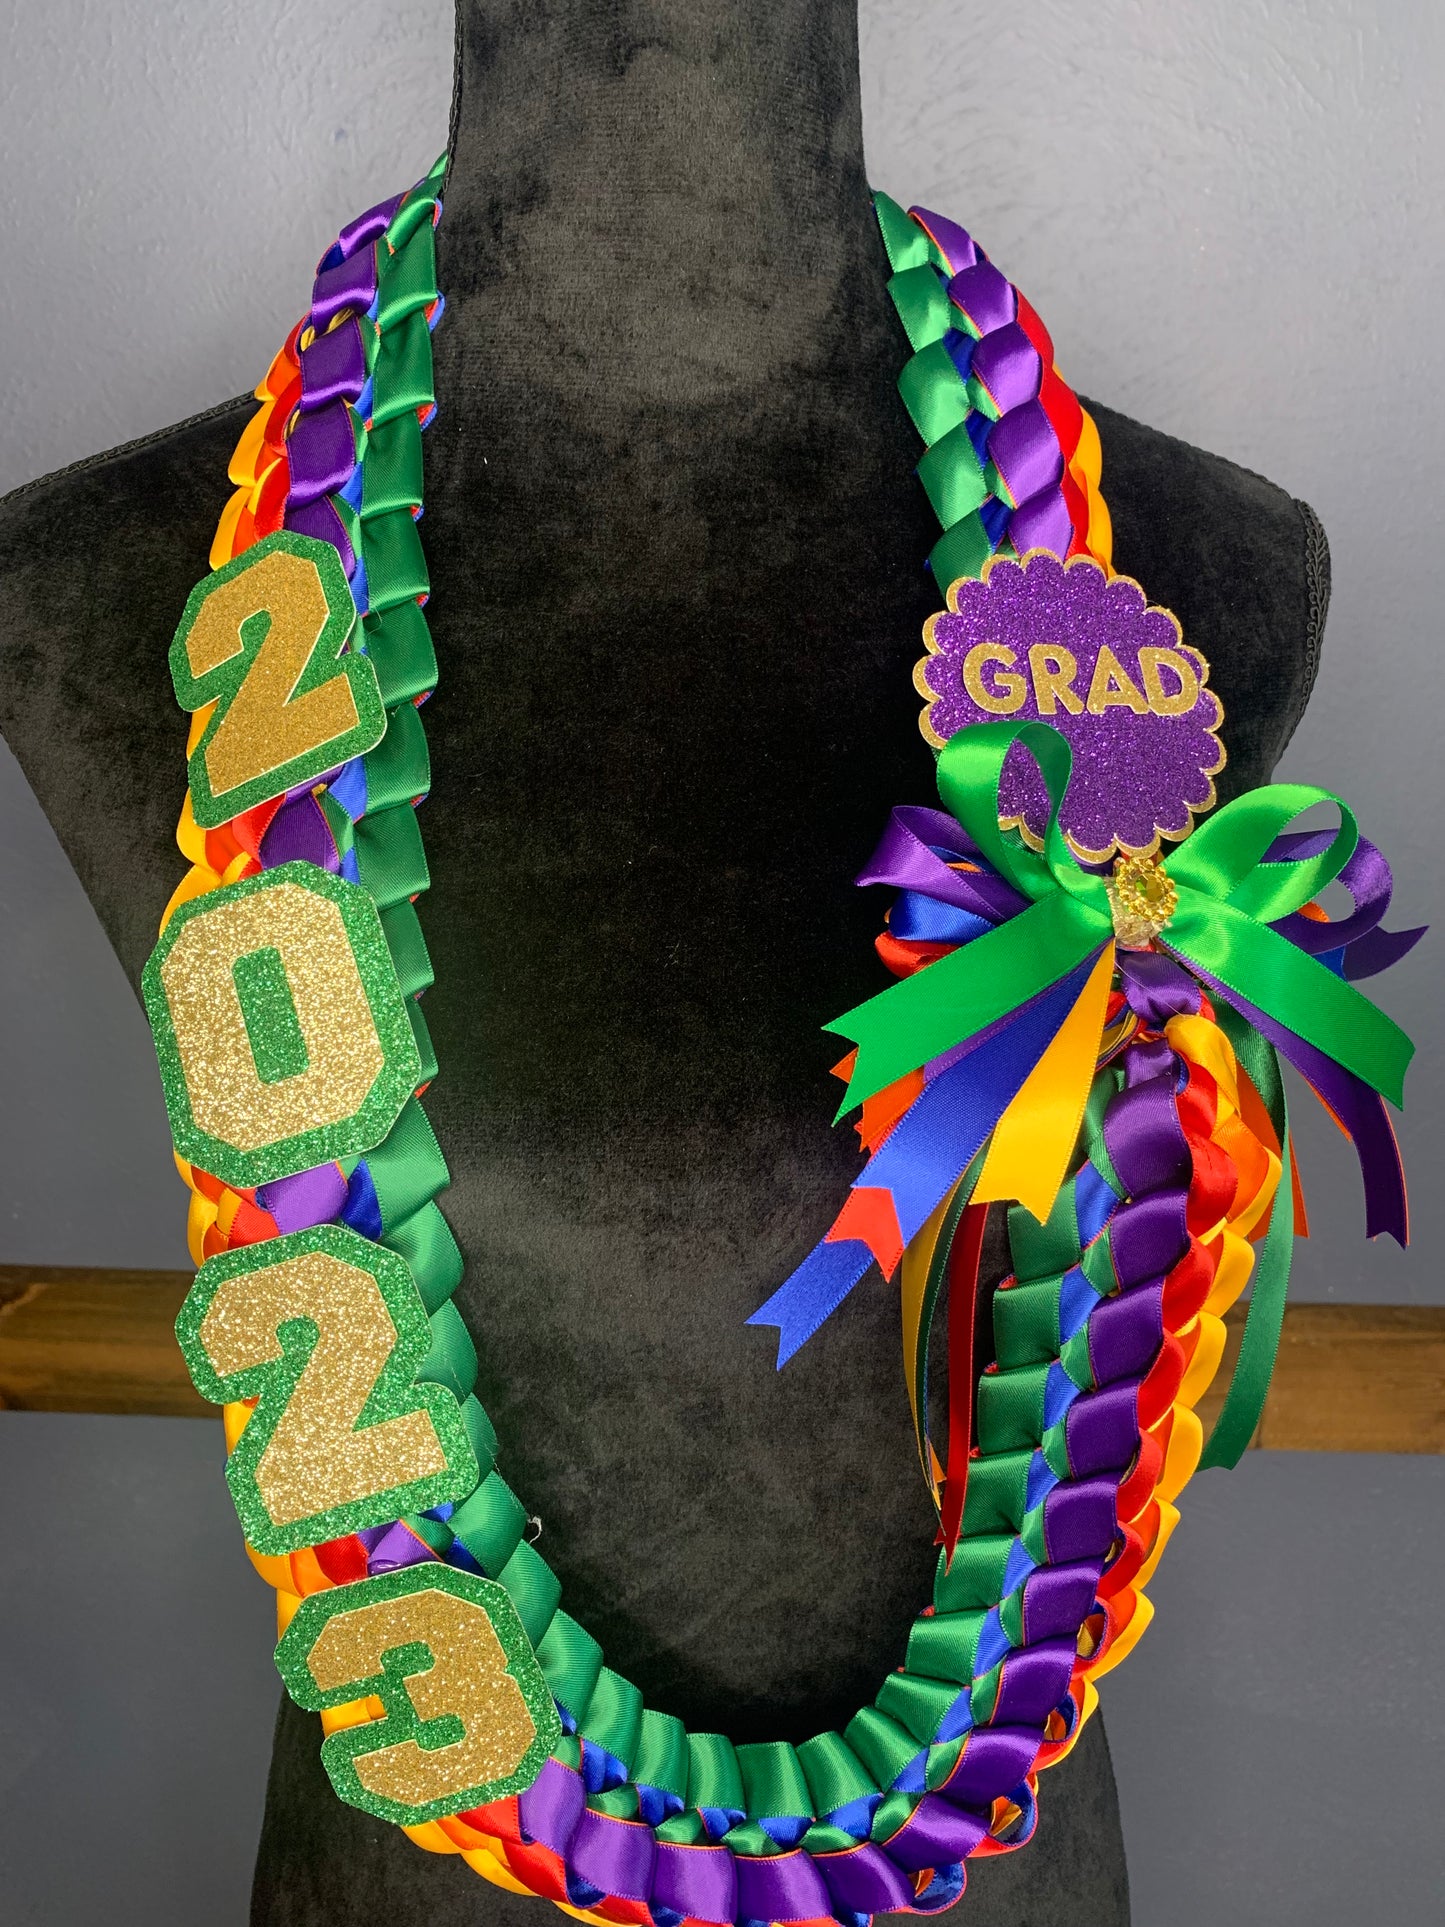 All Graduation Leis include grad year, a bow and a name or other embellishment such as grad cap, heart, "grad".  